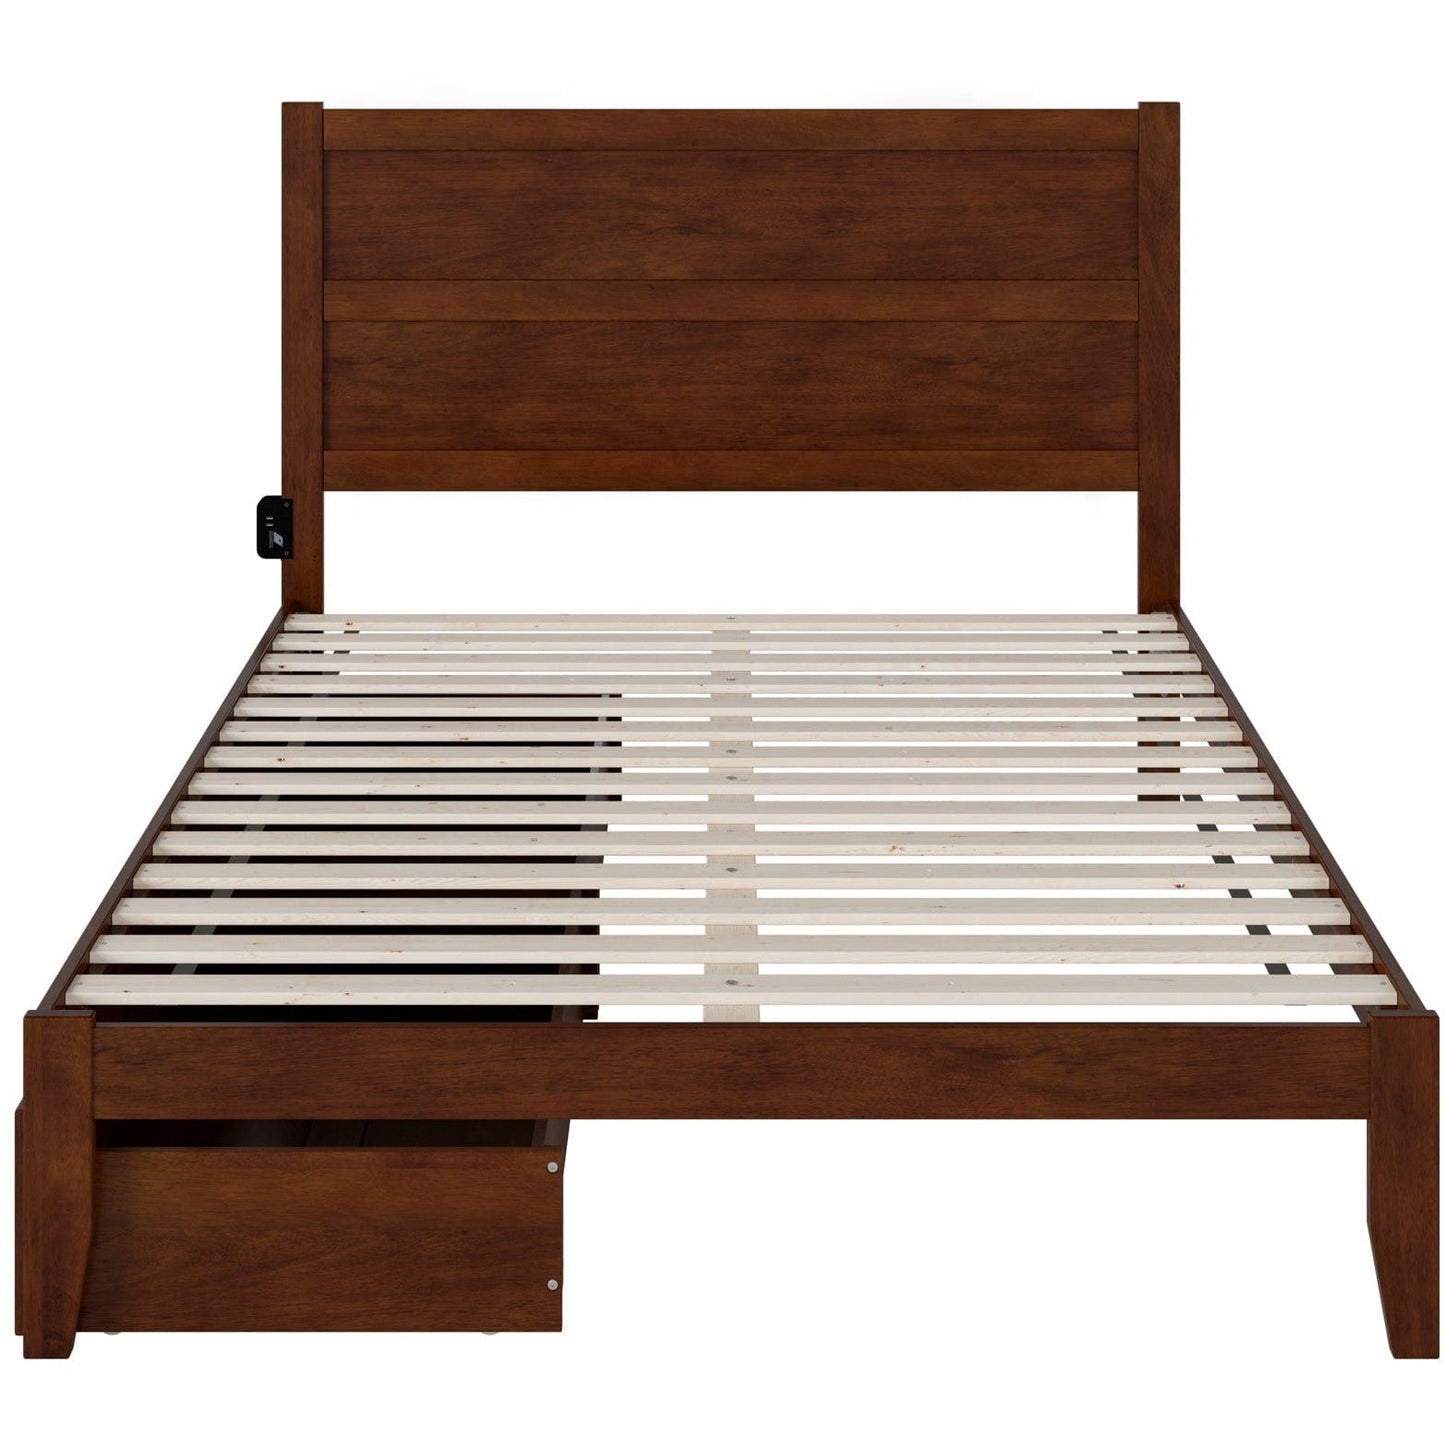 AFI Furnishings NoHo Queen Bed with 2 Drawers in Walnut AG9113444